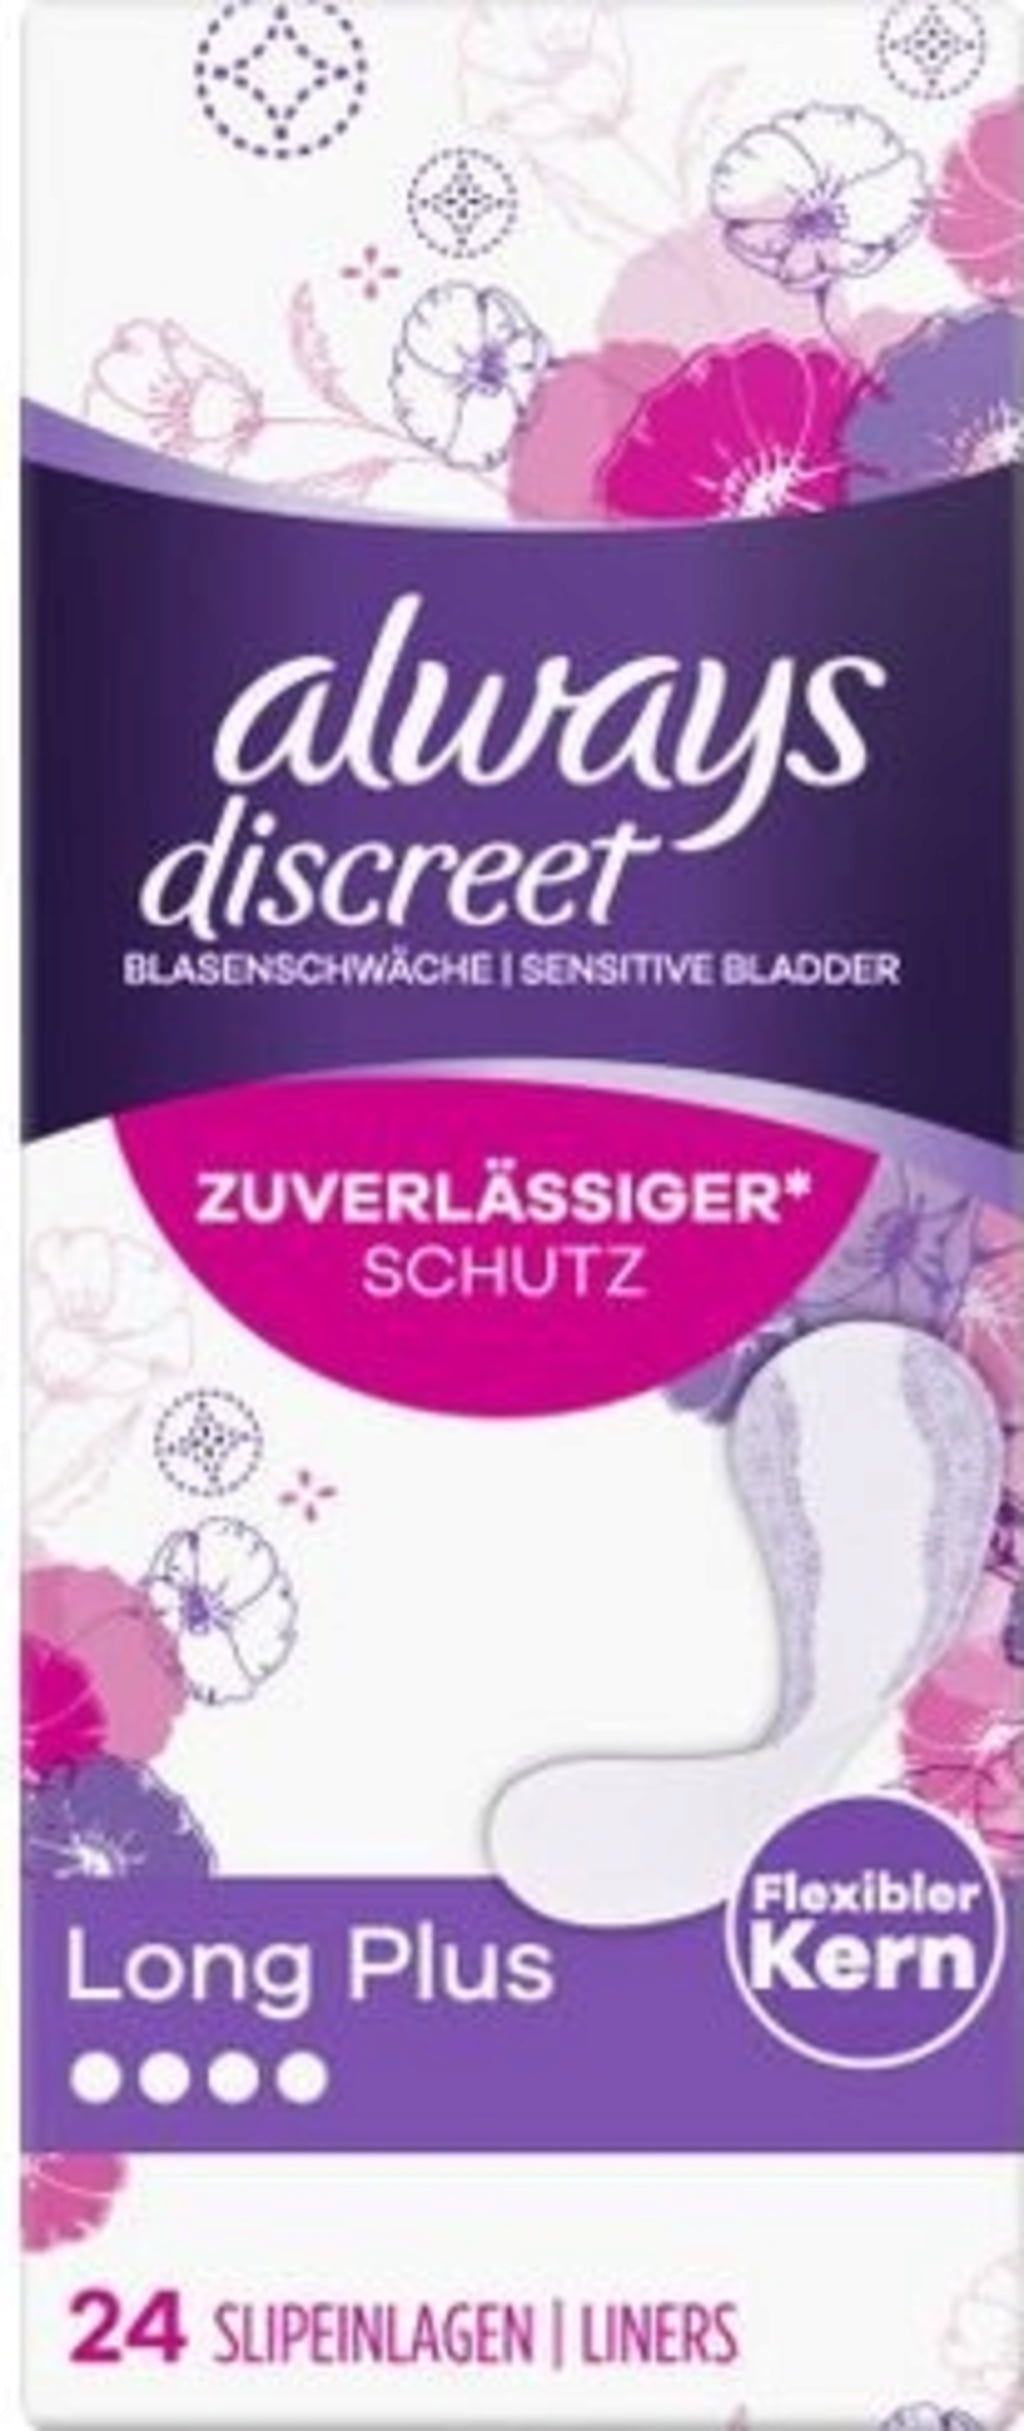 Always Discreet Incontinence Pads Normal For Sensitive Bladder 12